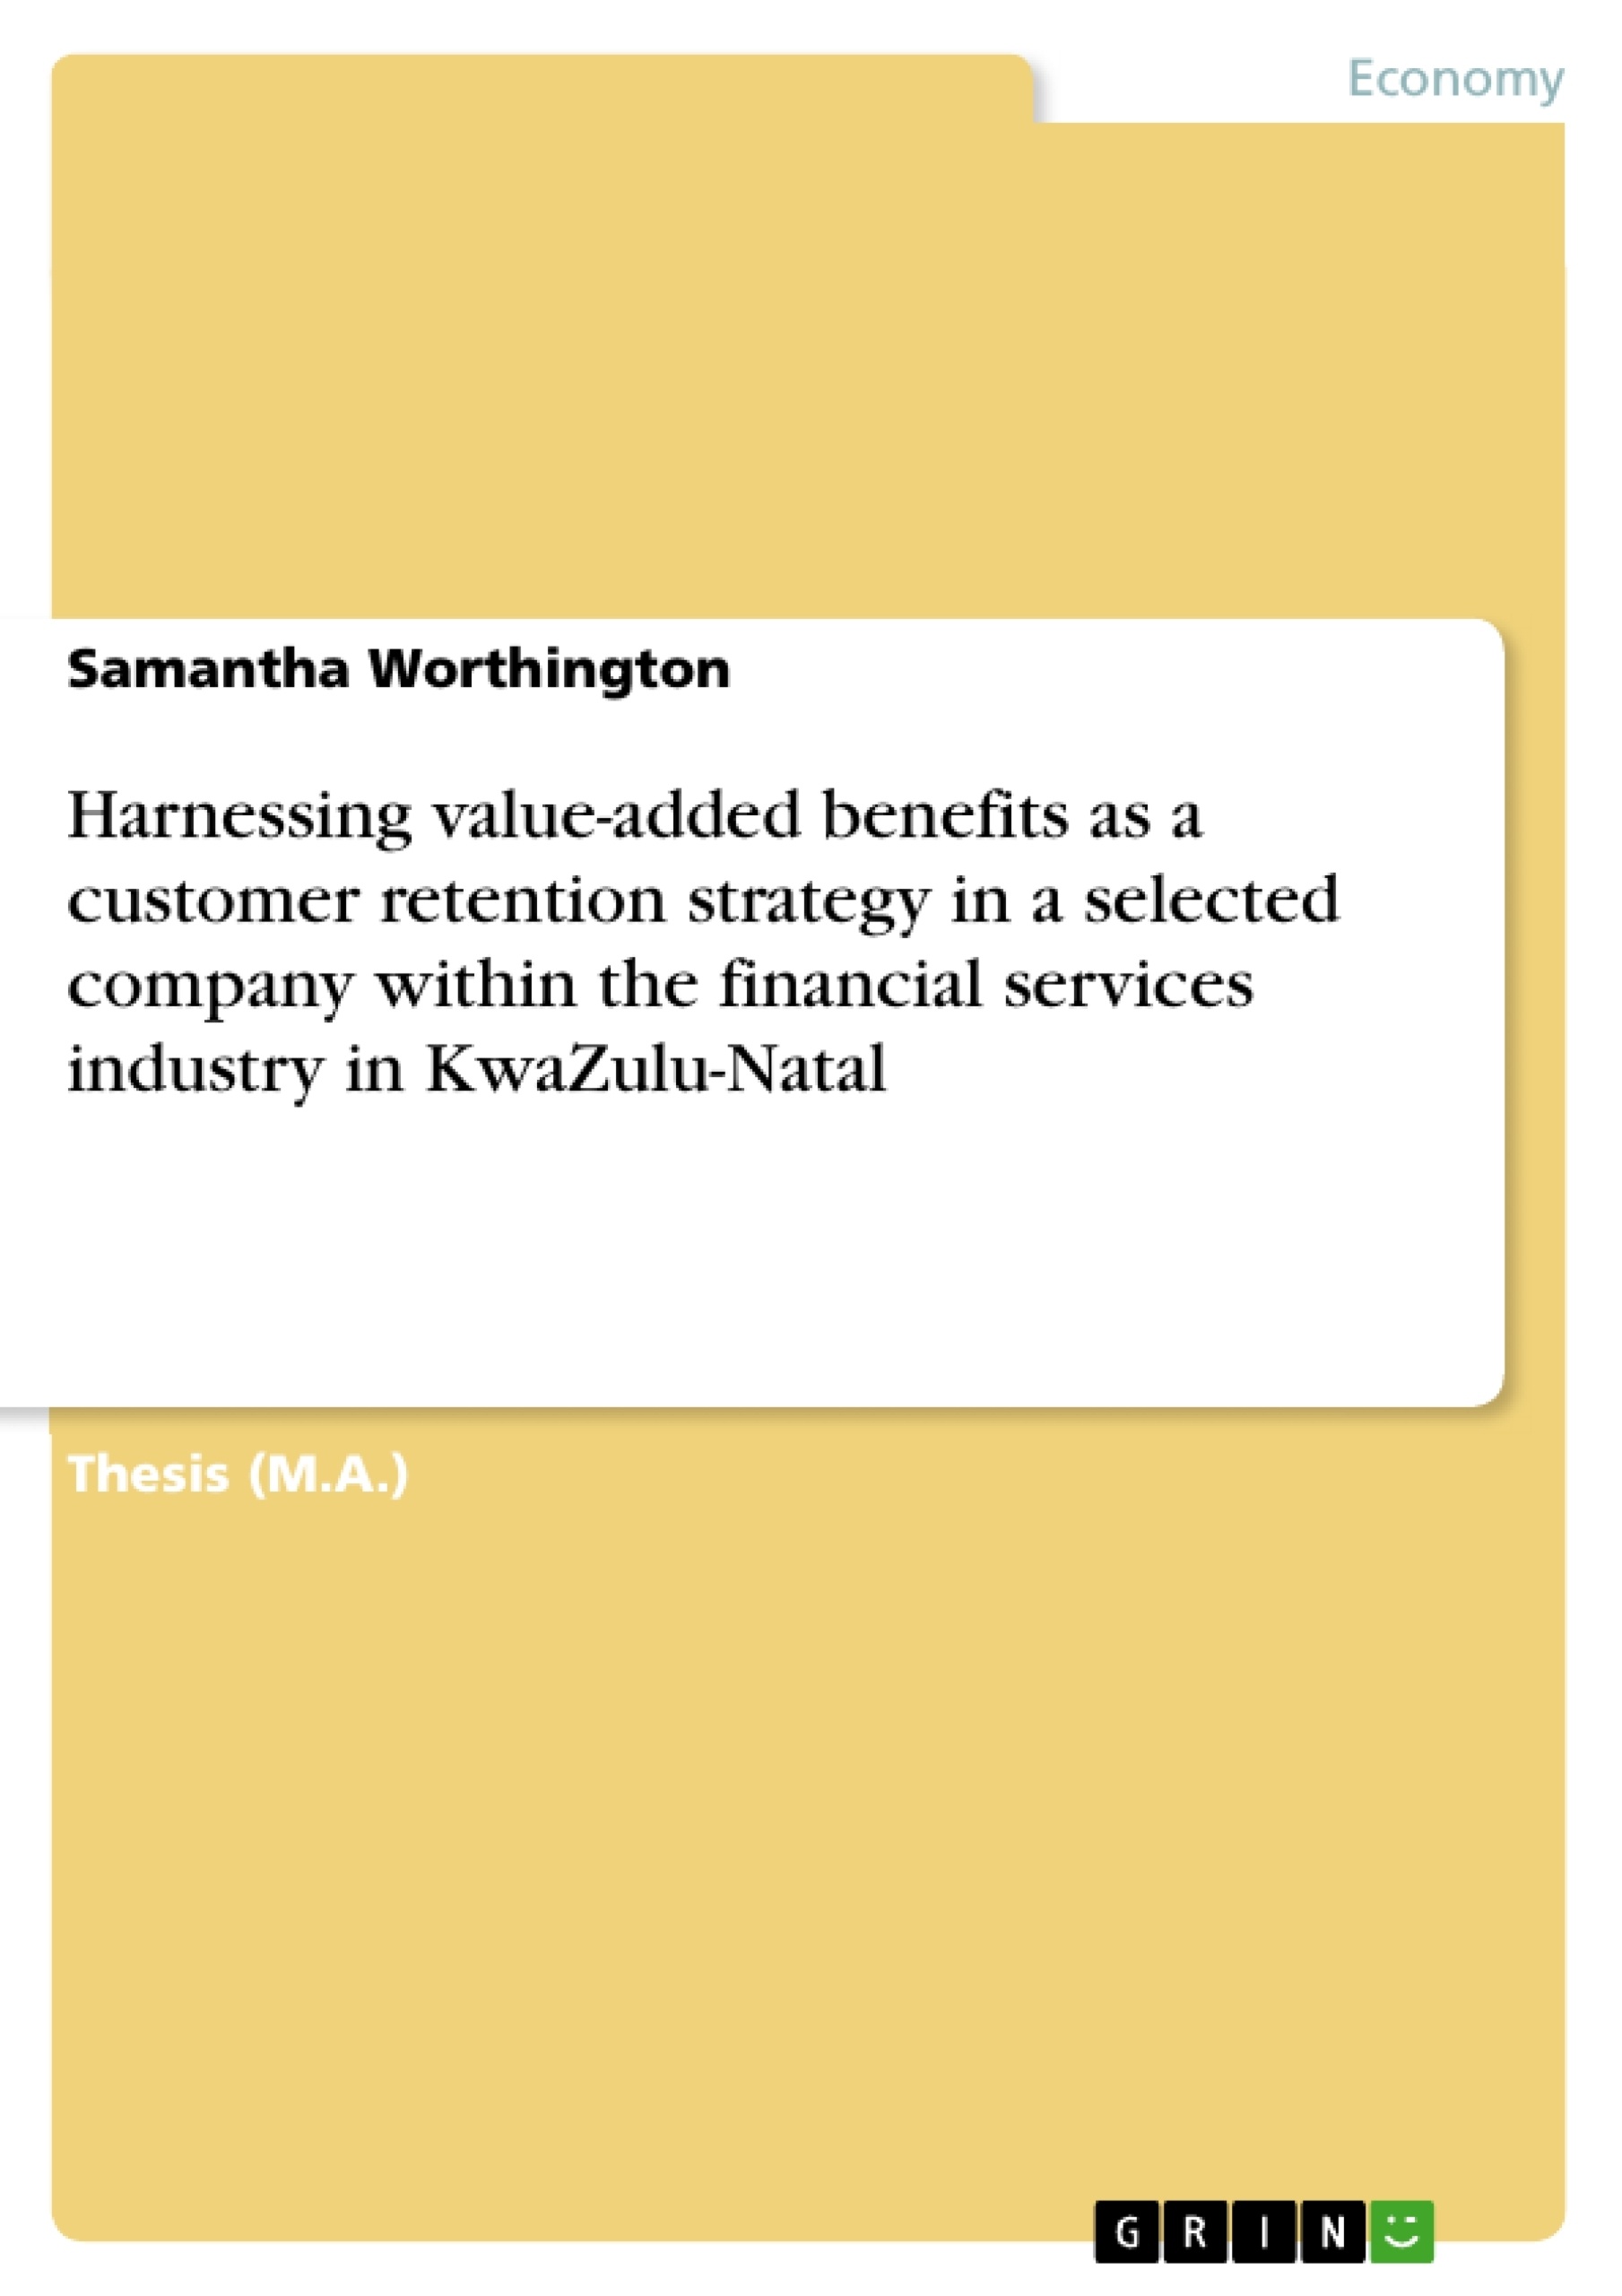 Title: Harnessing value-added benefits as a customer retention strategy in a selected company within the financial services industry in KwaZulu-Natal